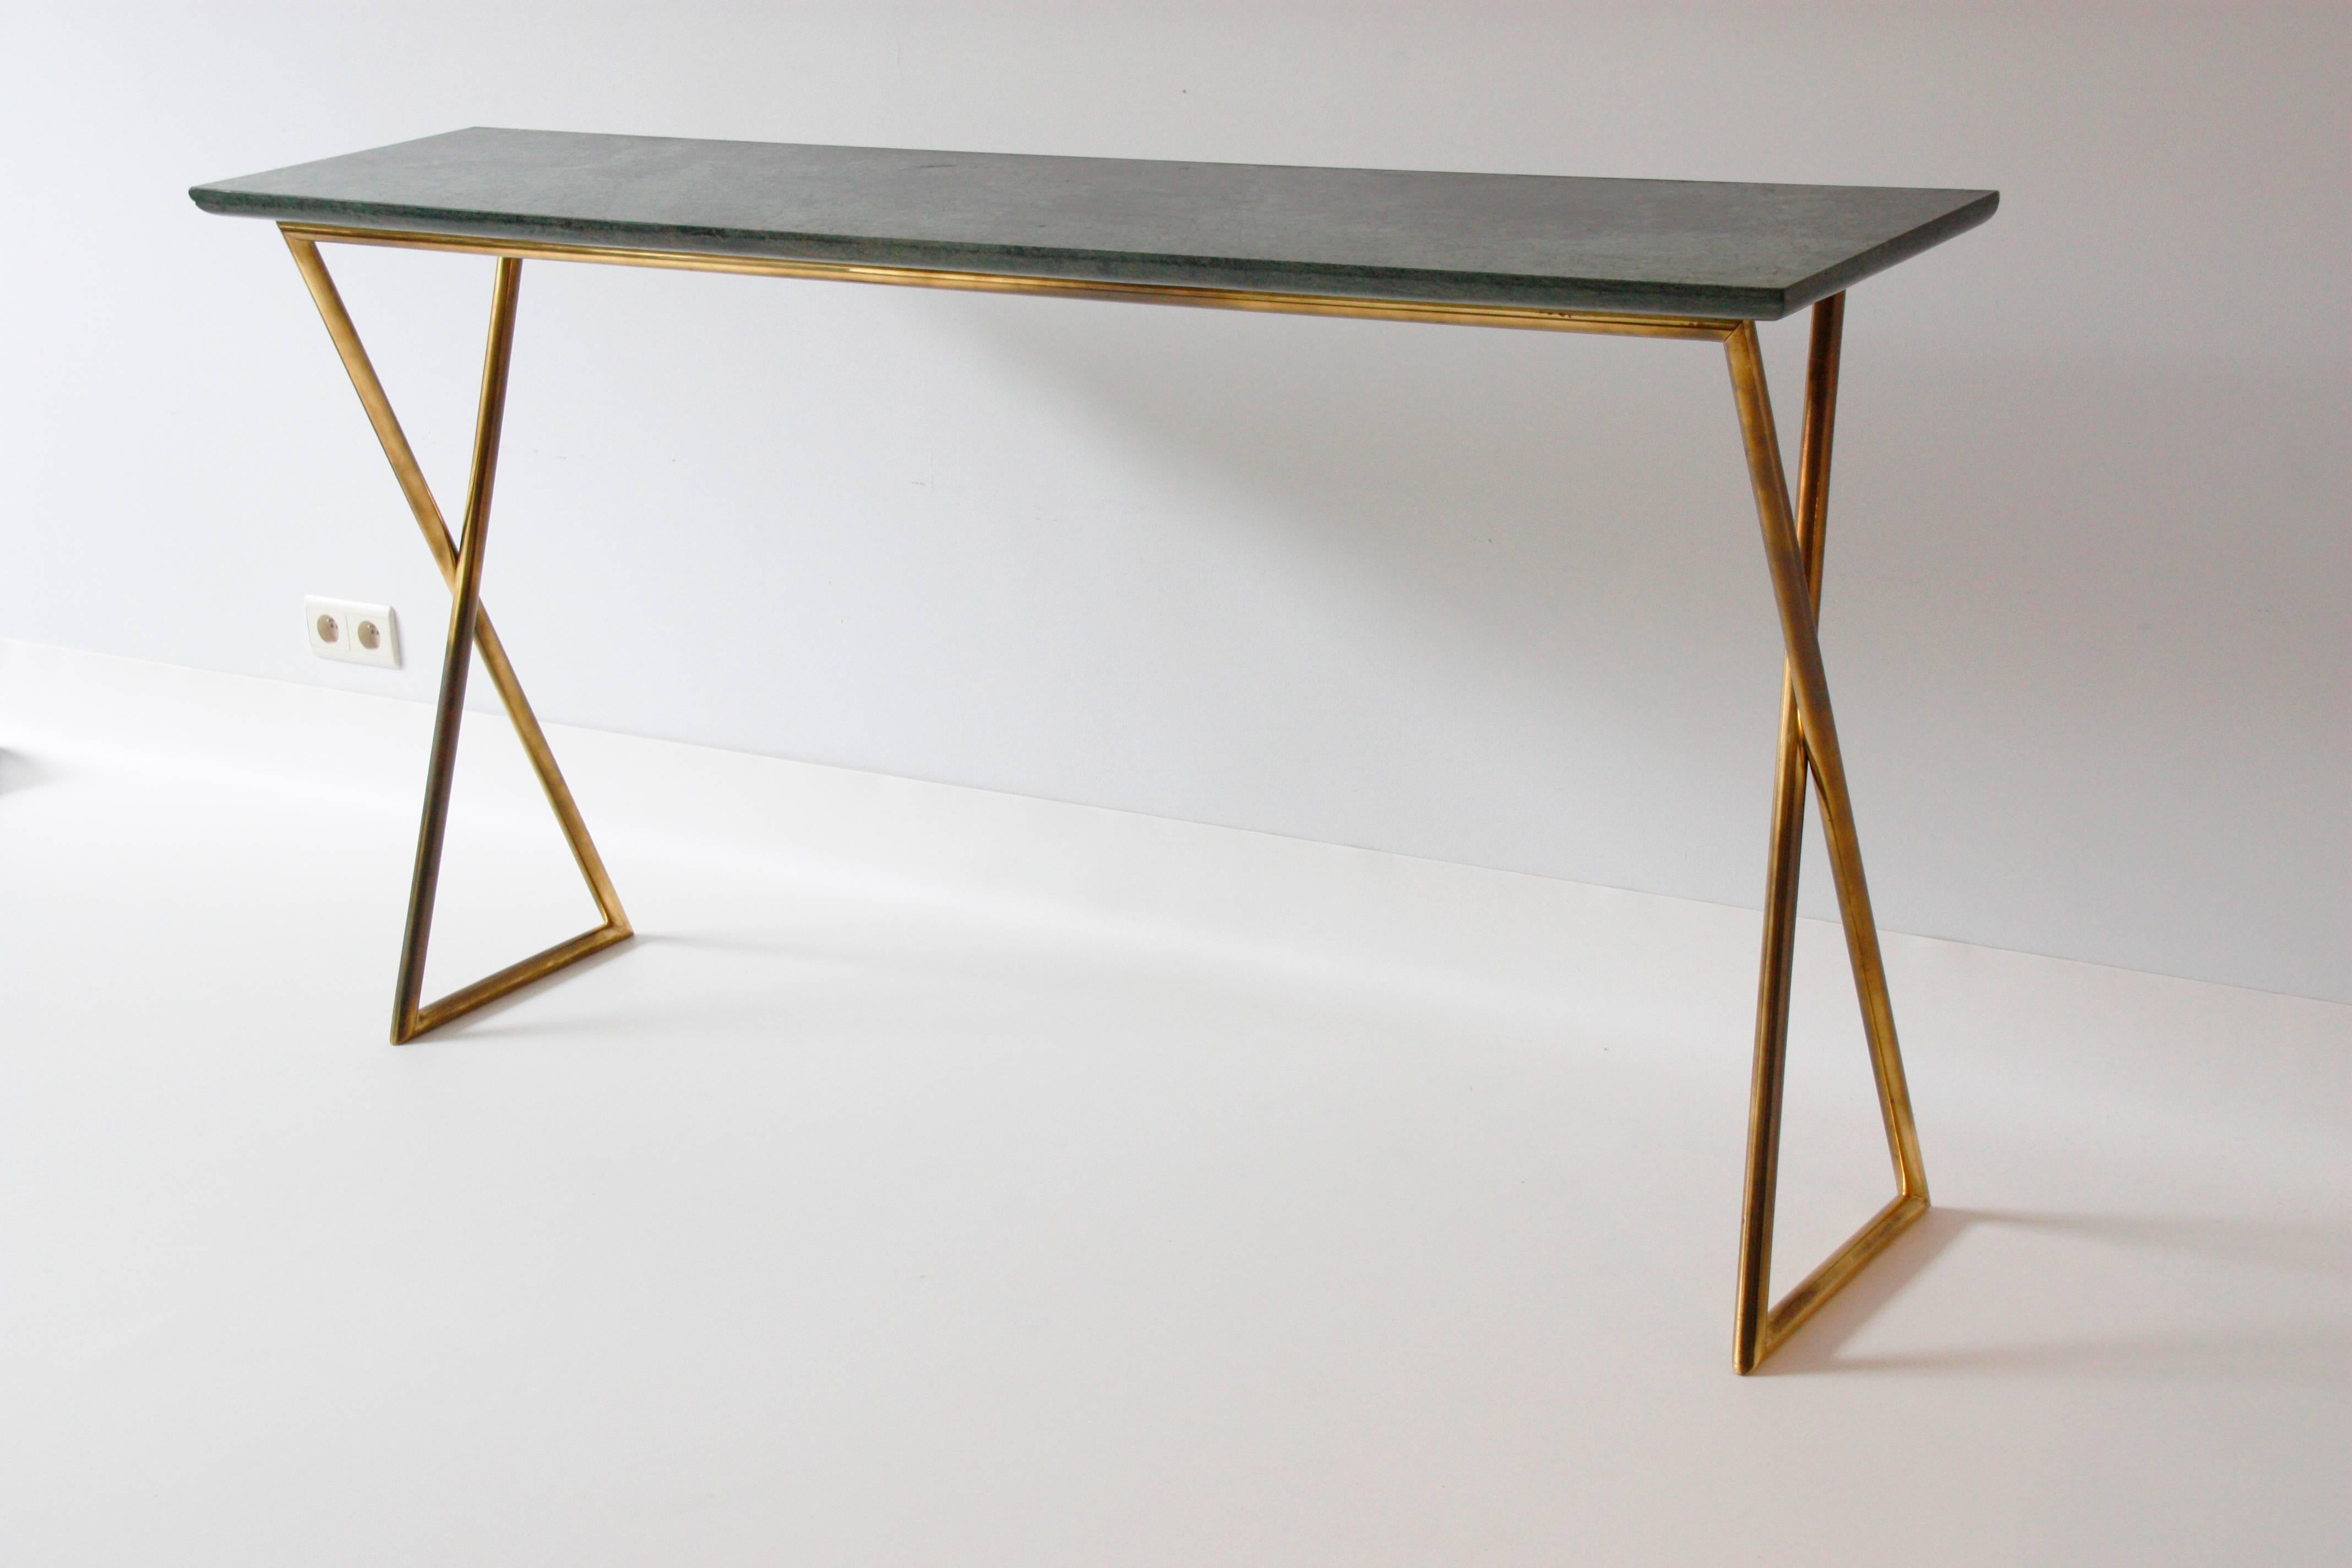 Vintage console with a brass structure and a thick dark green marble attributed to Osvaldo Borsani, Italy, circa 1945-1950

Measure: 66.92in x 14.96in, 35.43in height
1m70 x 38cm - Hauteur 90cm.